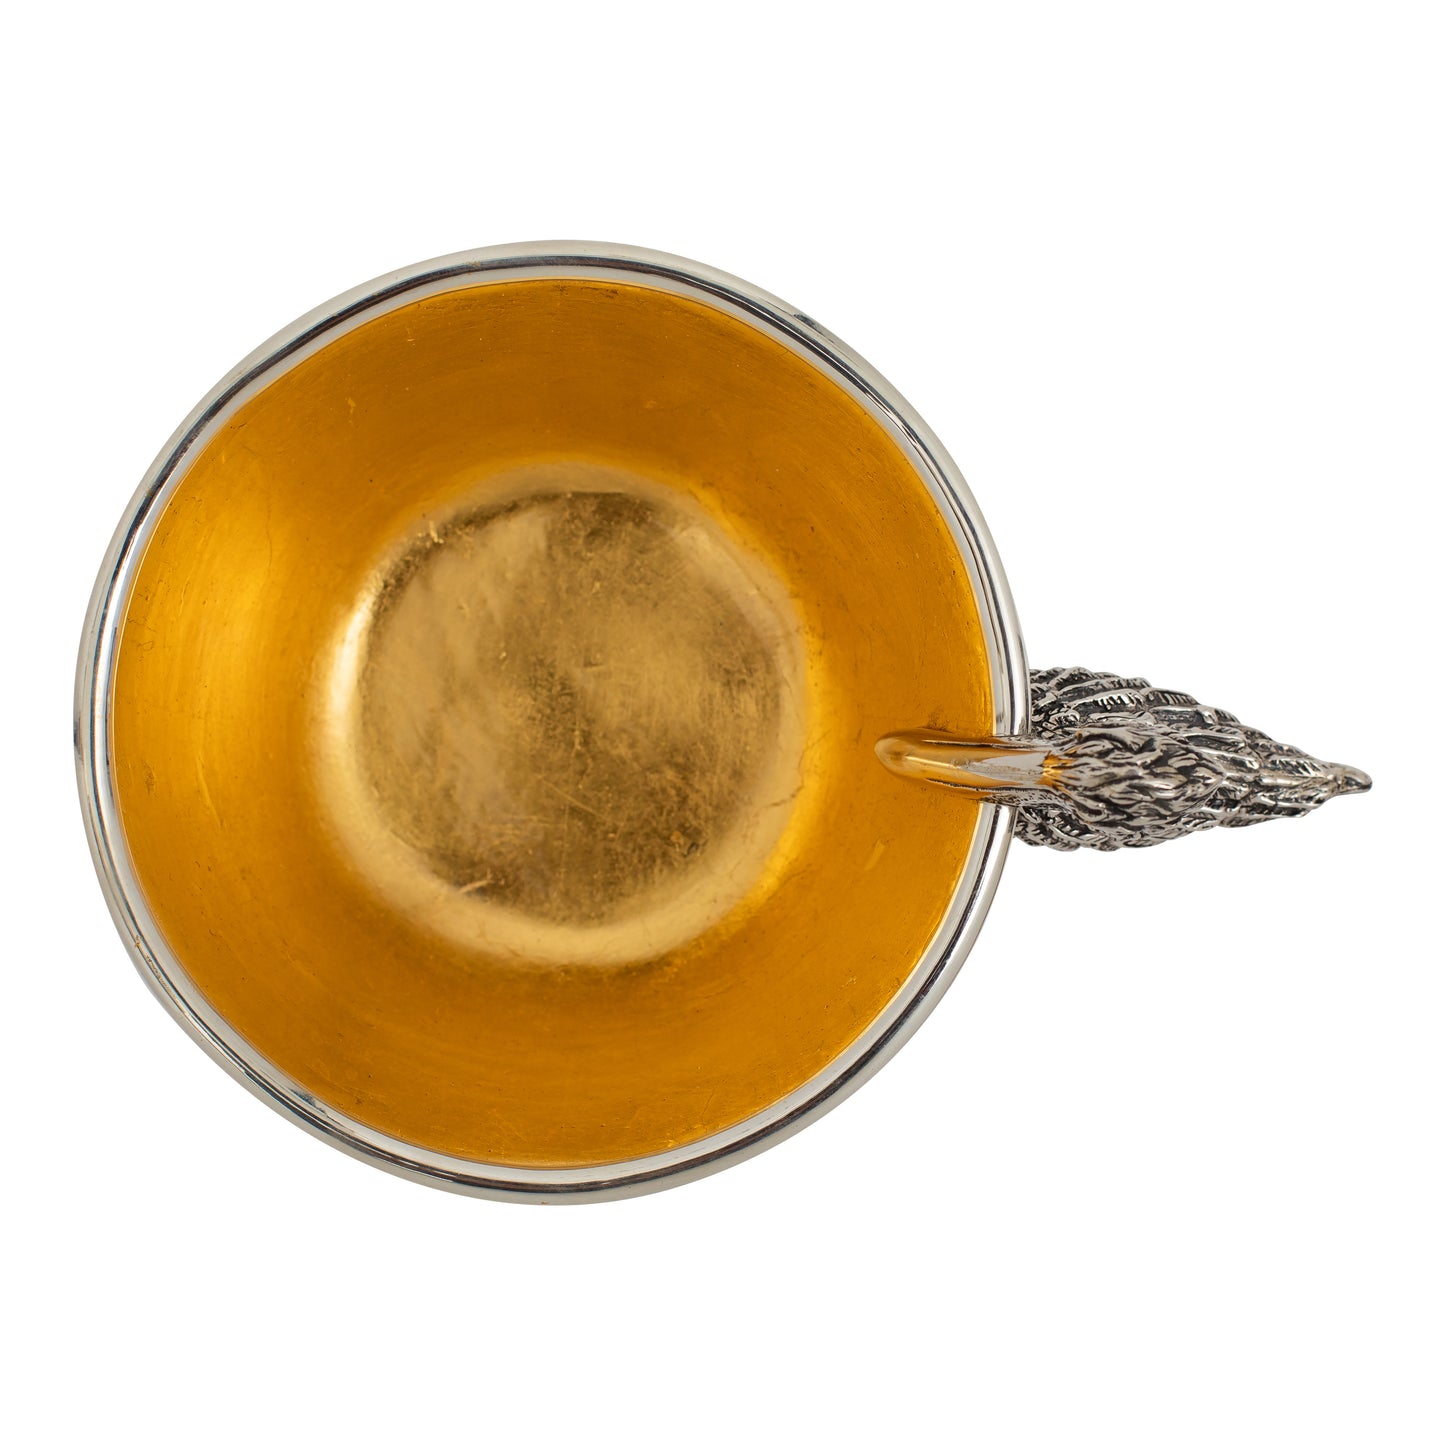 Galuchat Bowl with Sterling Silver Pelican and Lined with Gold Leaf